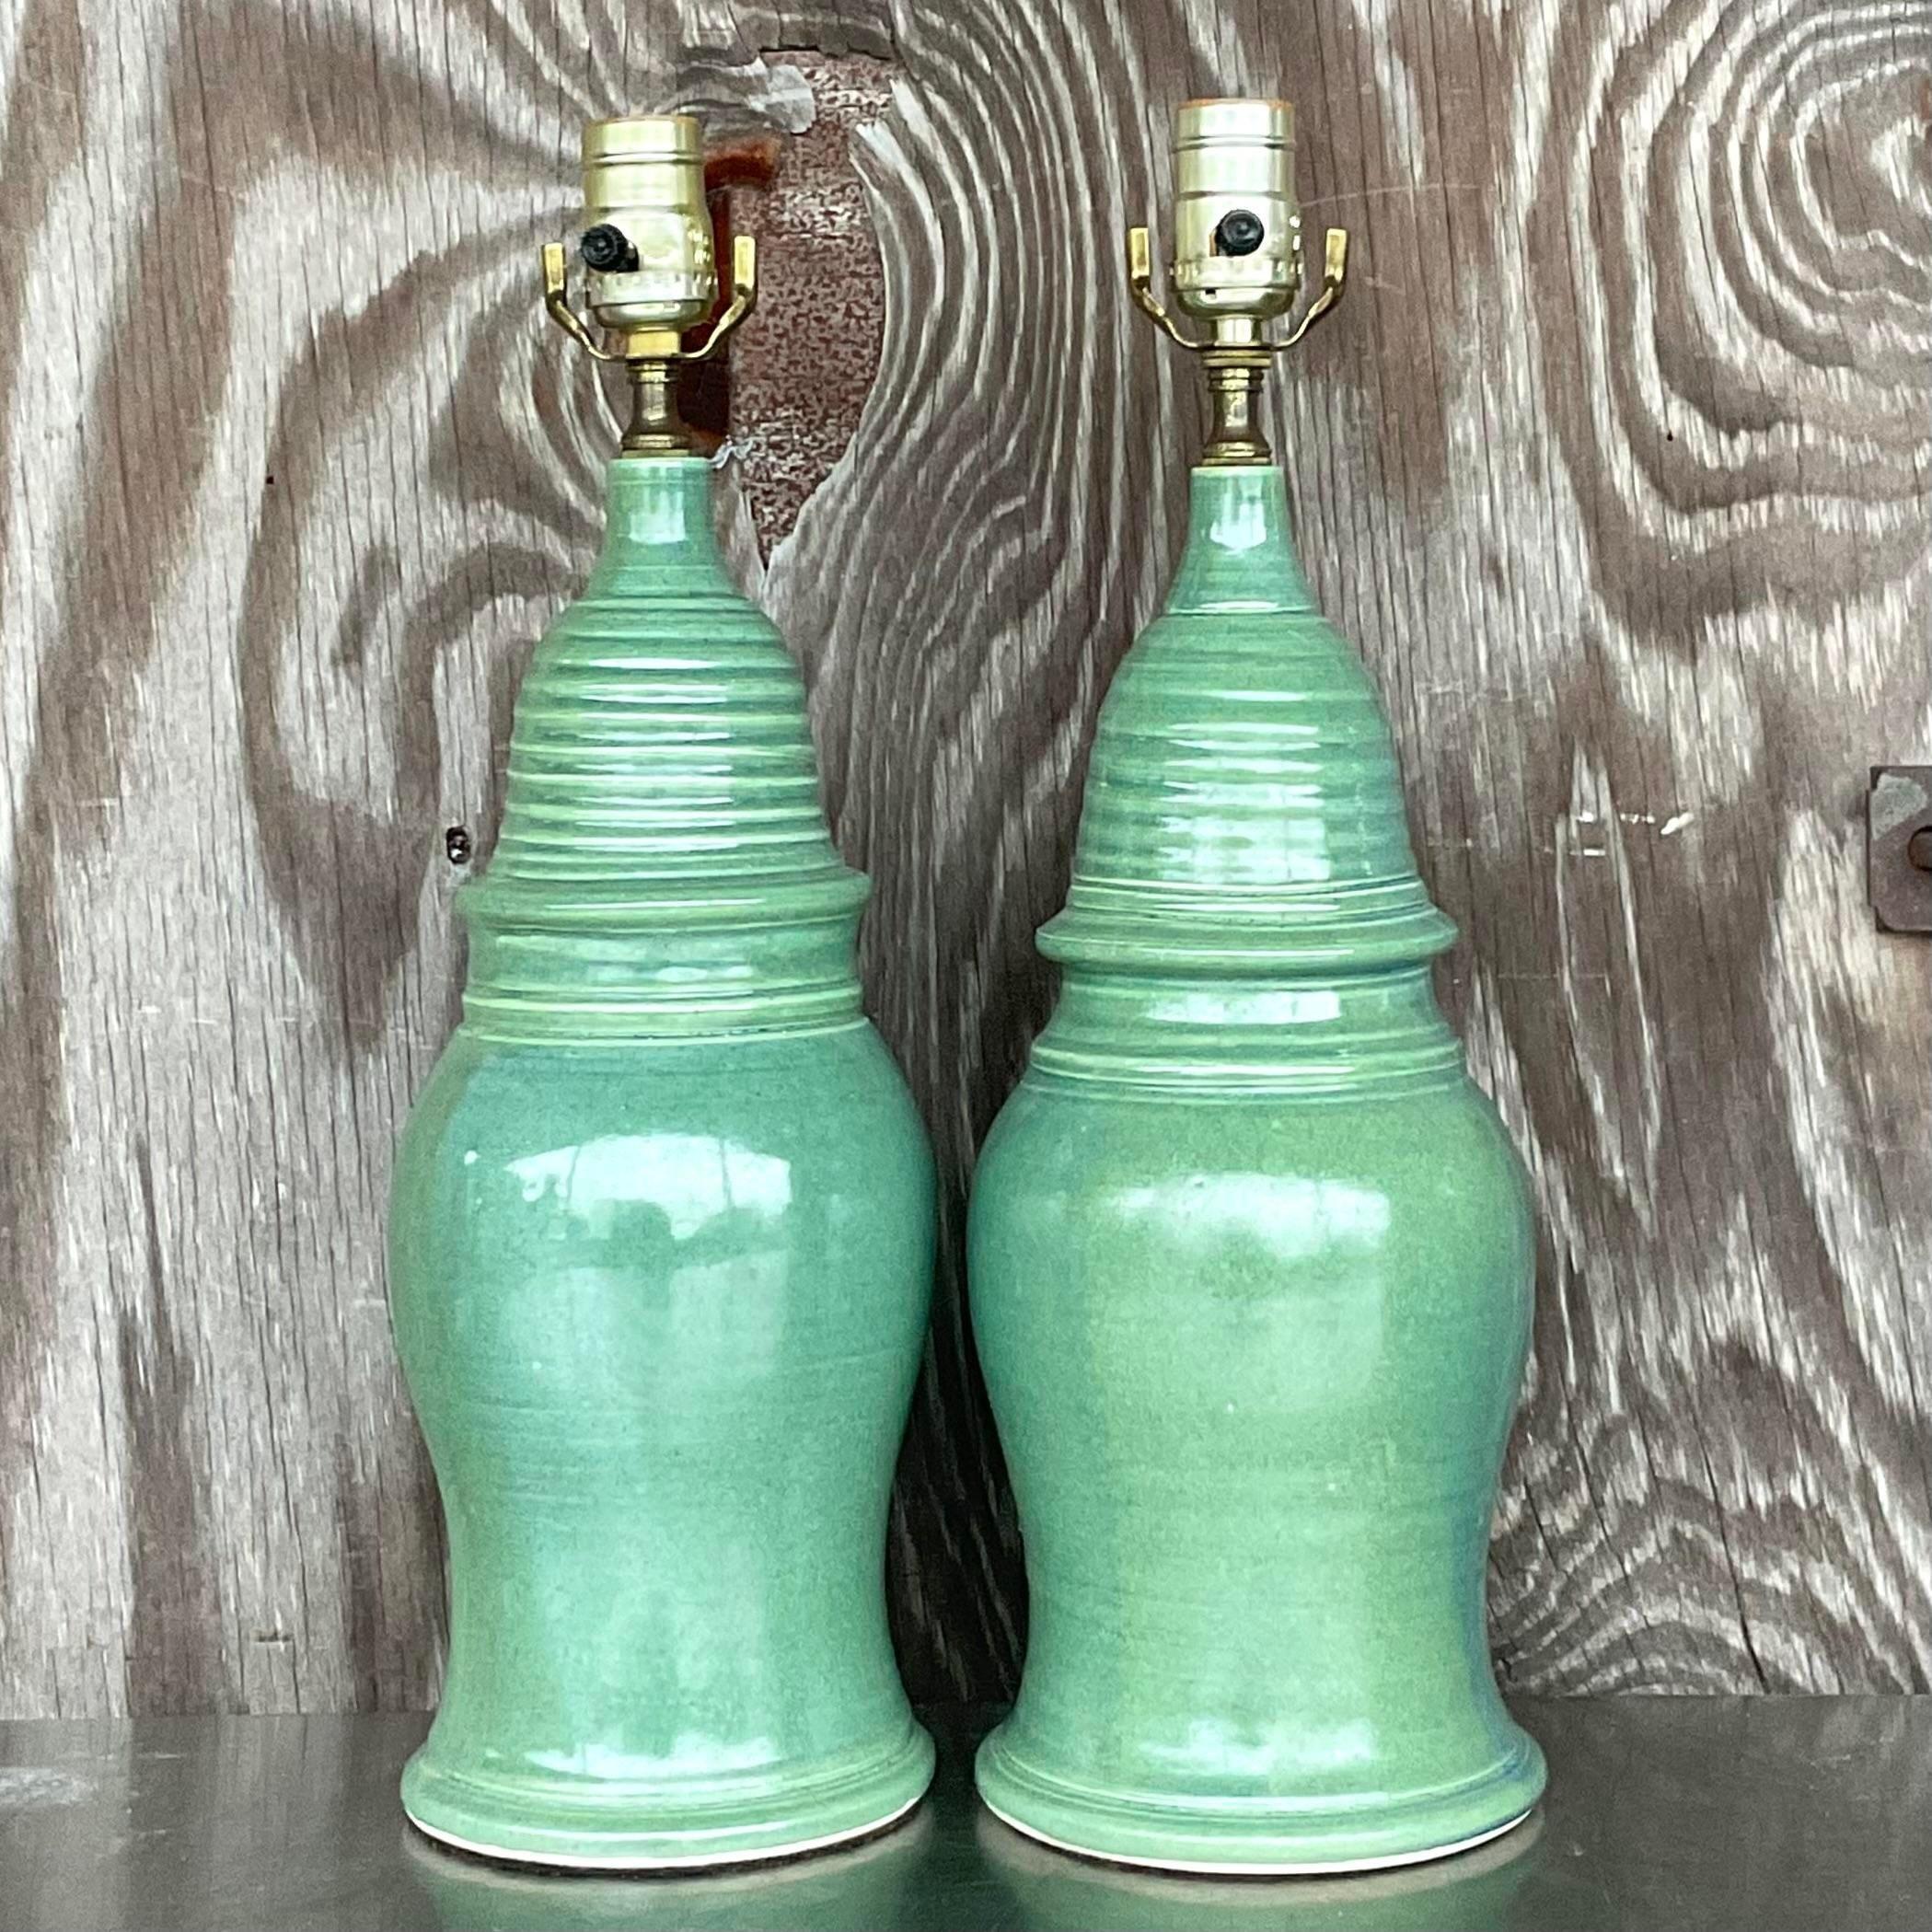 American Vintage Boho Glazed Ceramic Table Lamps - a Pair For Sale